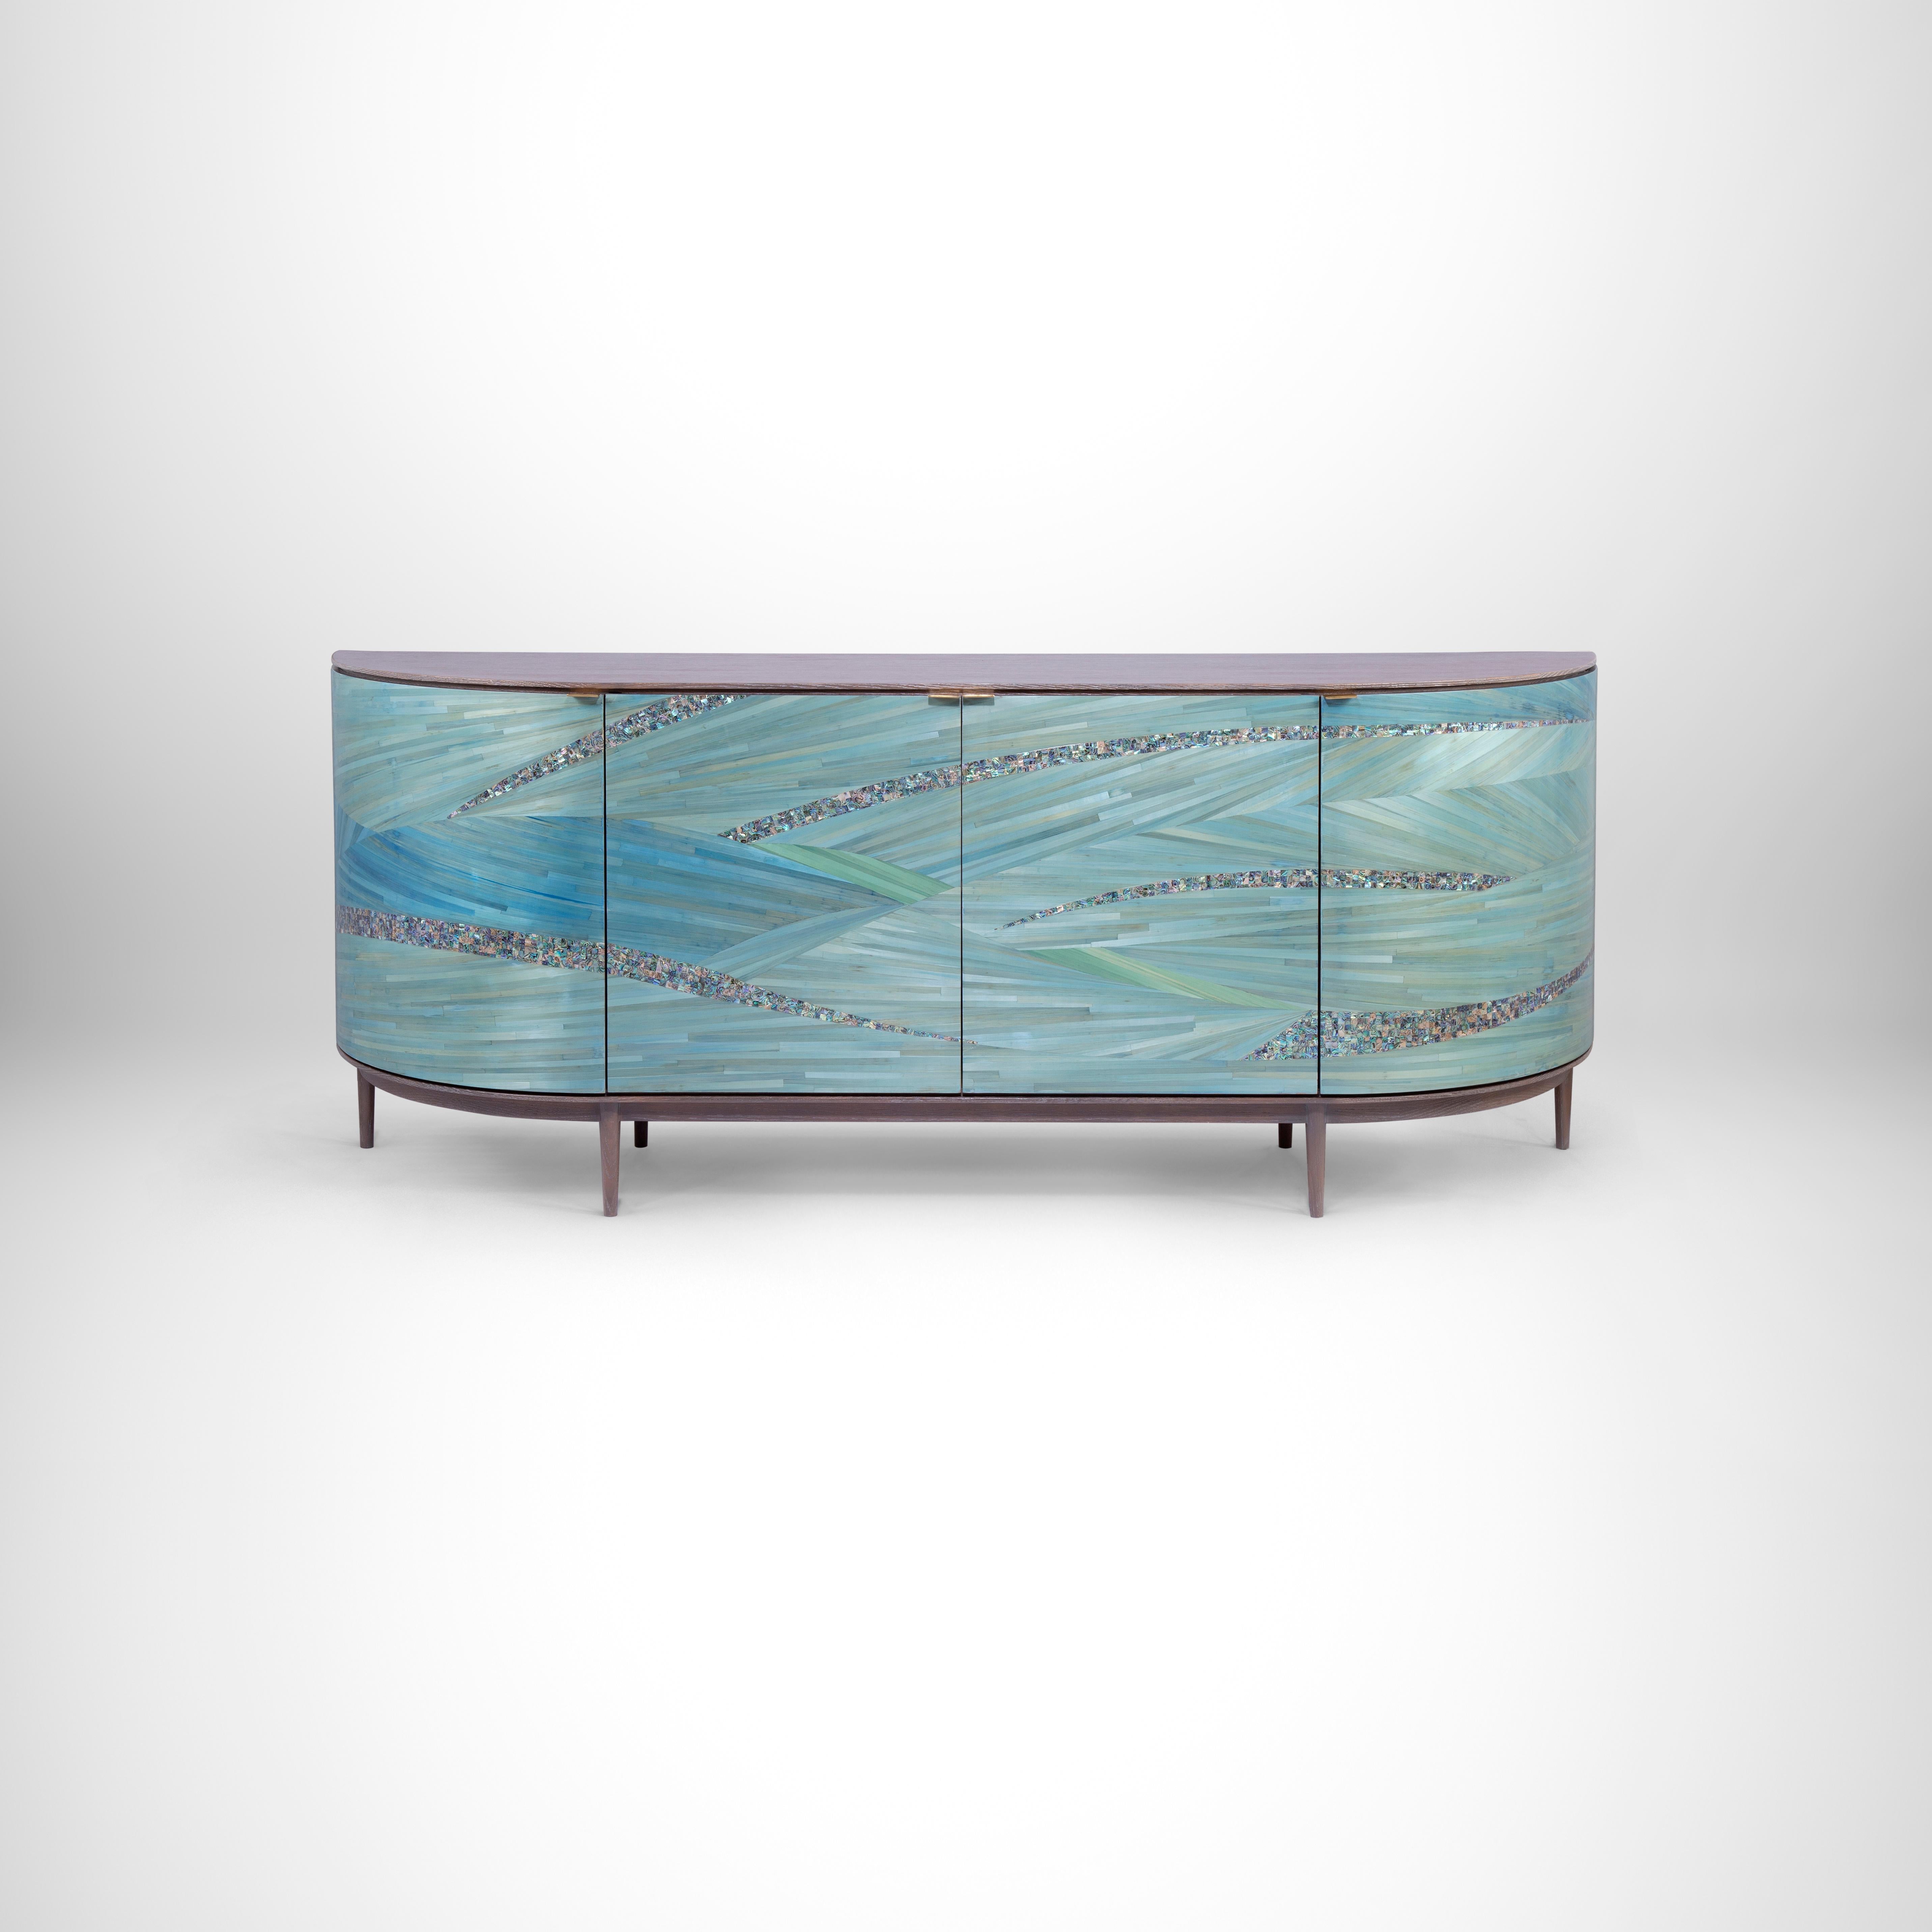 Luxury sideboard with Rare Turquoise Mother of Pearl and Hand-Laid Blue Straw.
A distinctive dinning buffet that is a feast for the eyes. Hand-laid luscious shades of blue signature Shewekar-Straw infused with unique turquoise mother of pearl gives